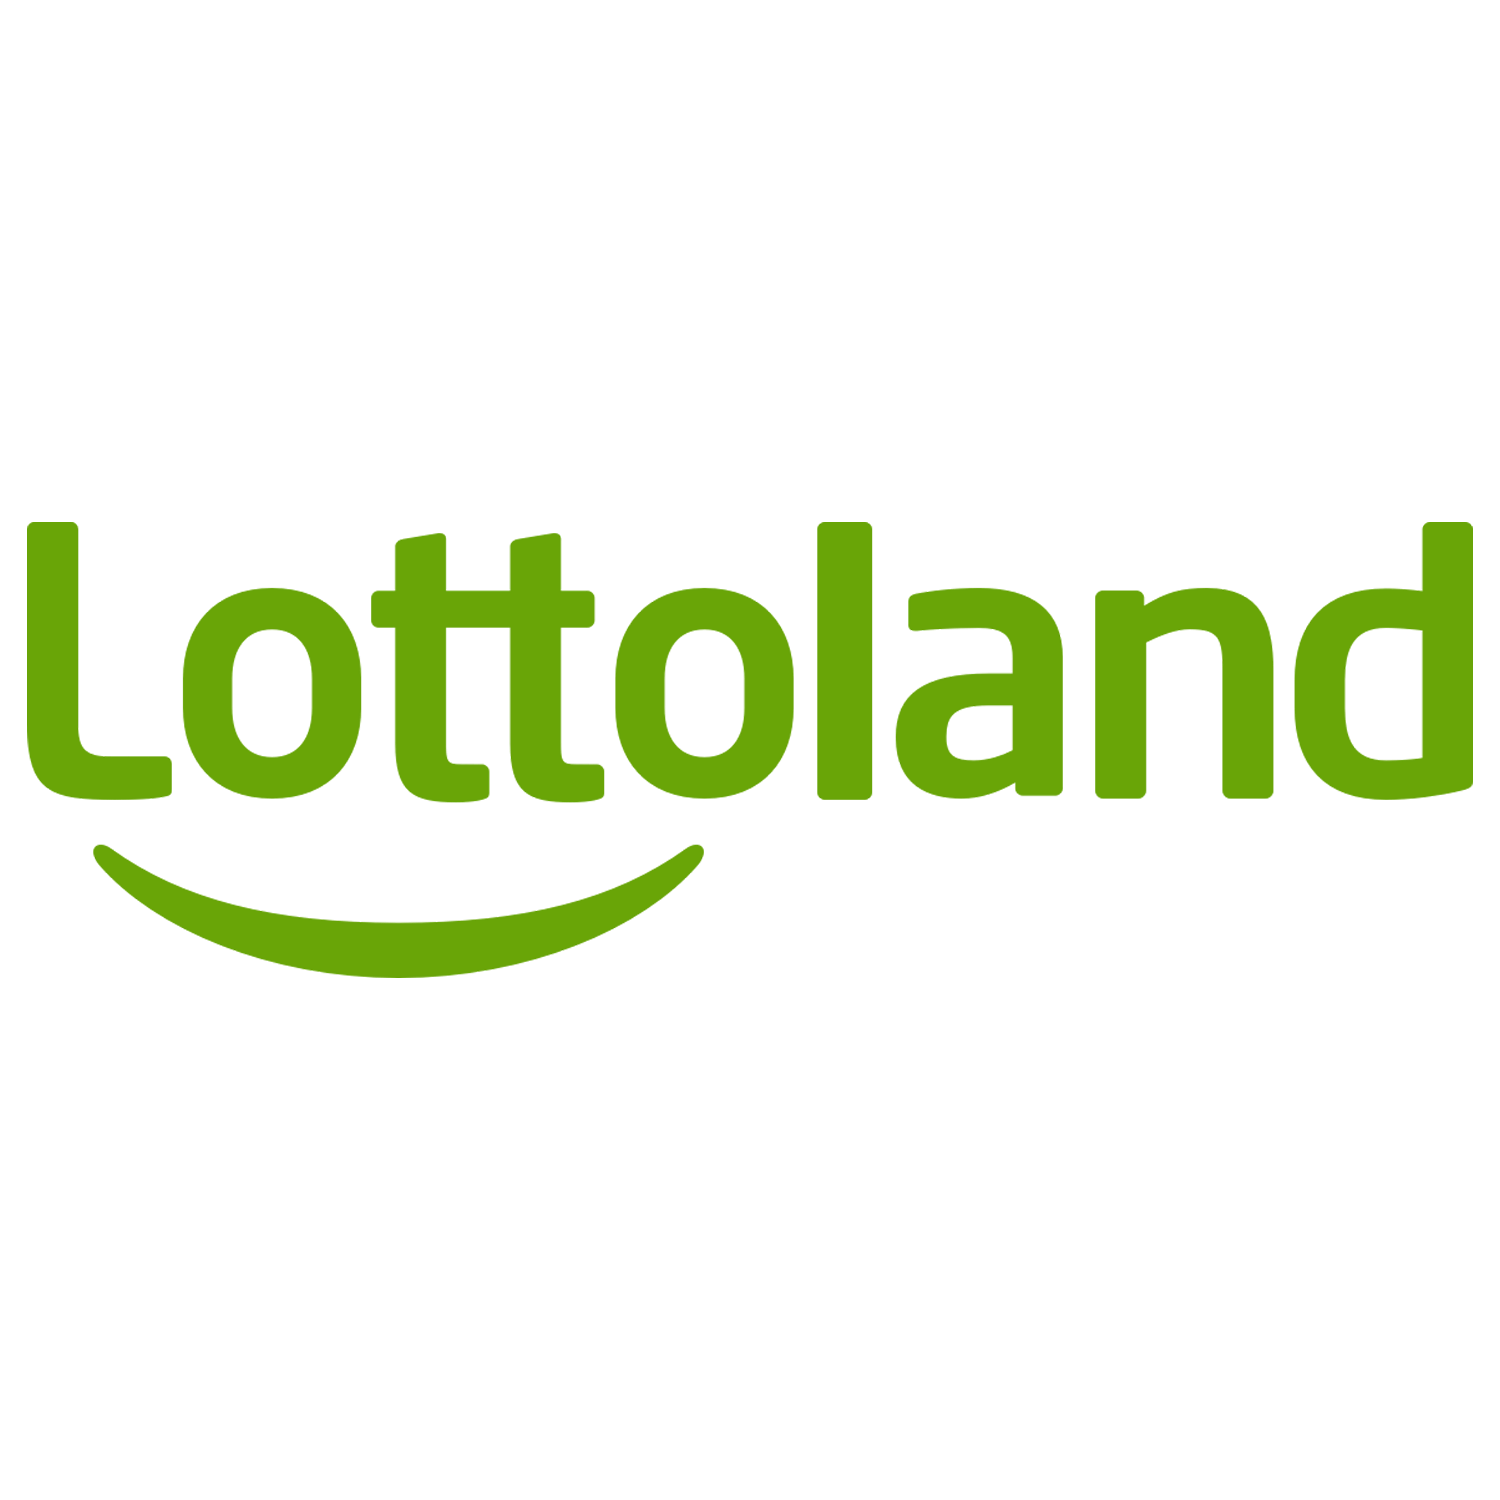 In this review, we explain how to use Lottoland for betting and playing casino for users from India.